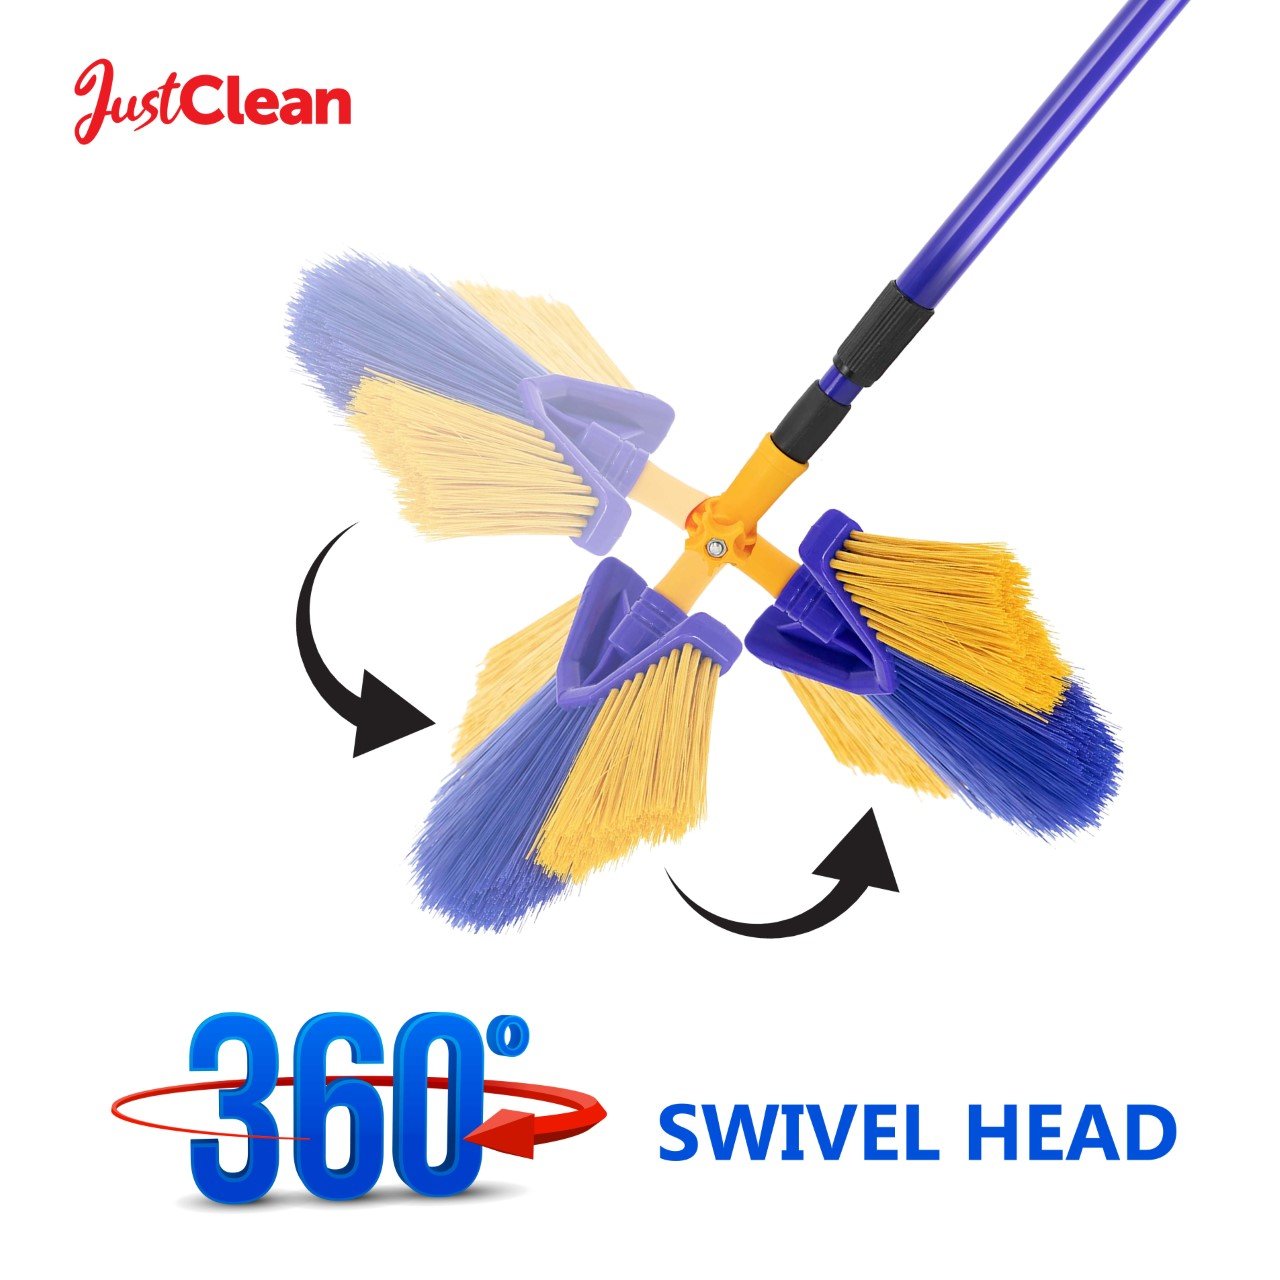 Extendable Swivel Head Brush Goes From 88cm to 150cm 3651 (Big Parcel Rate)